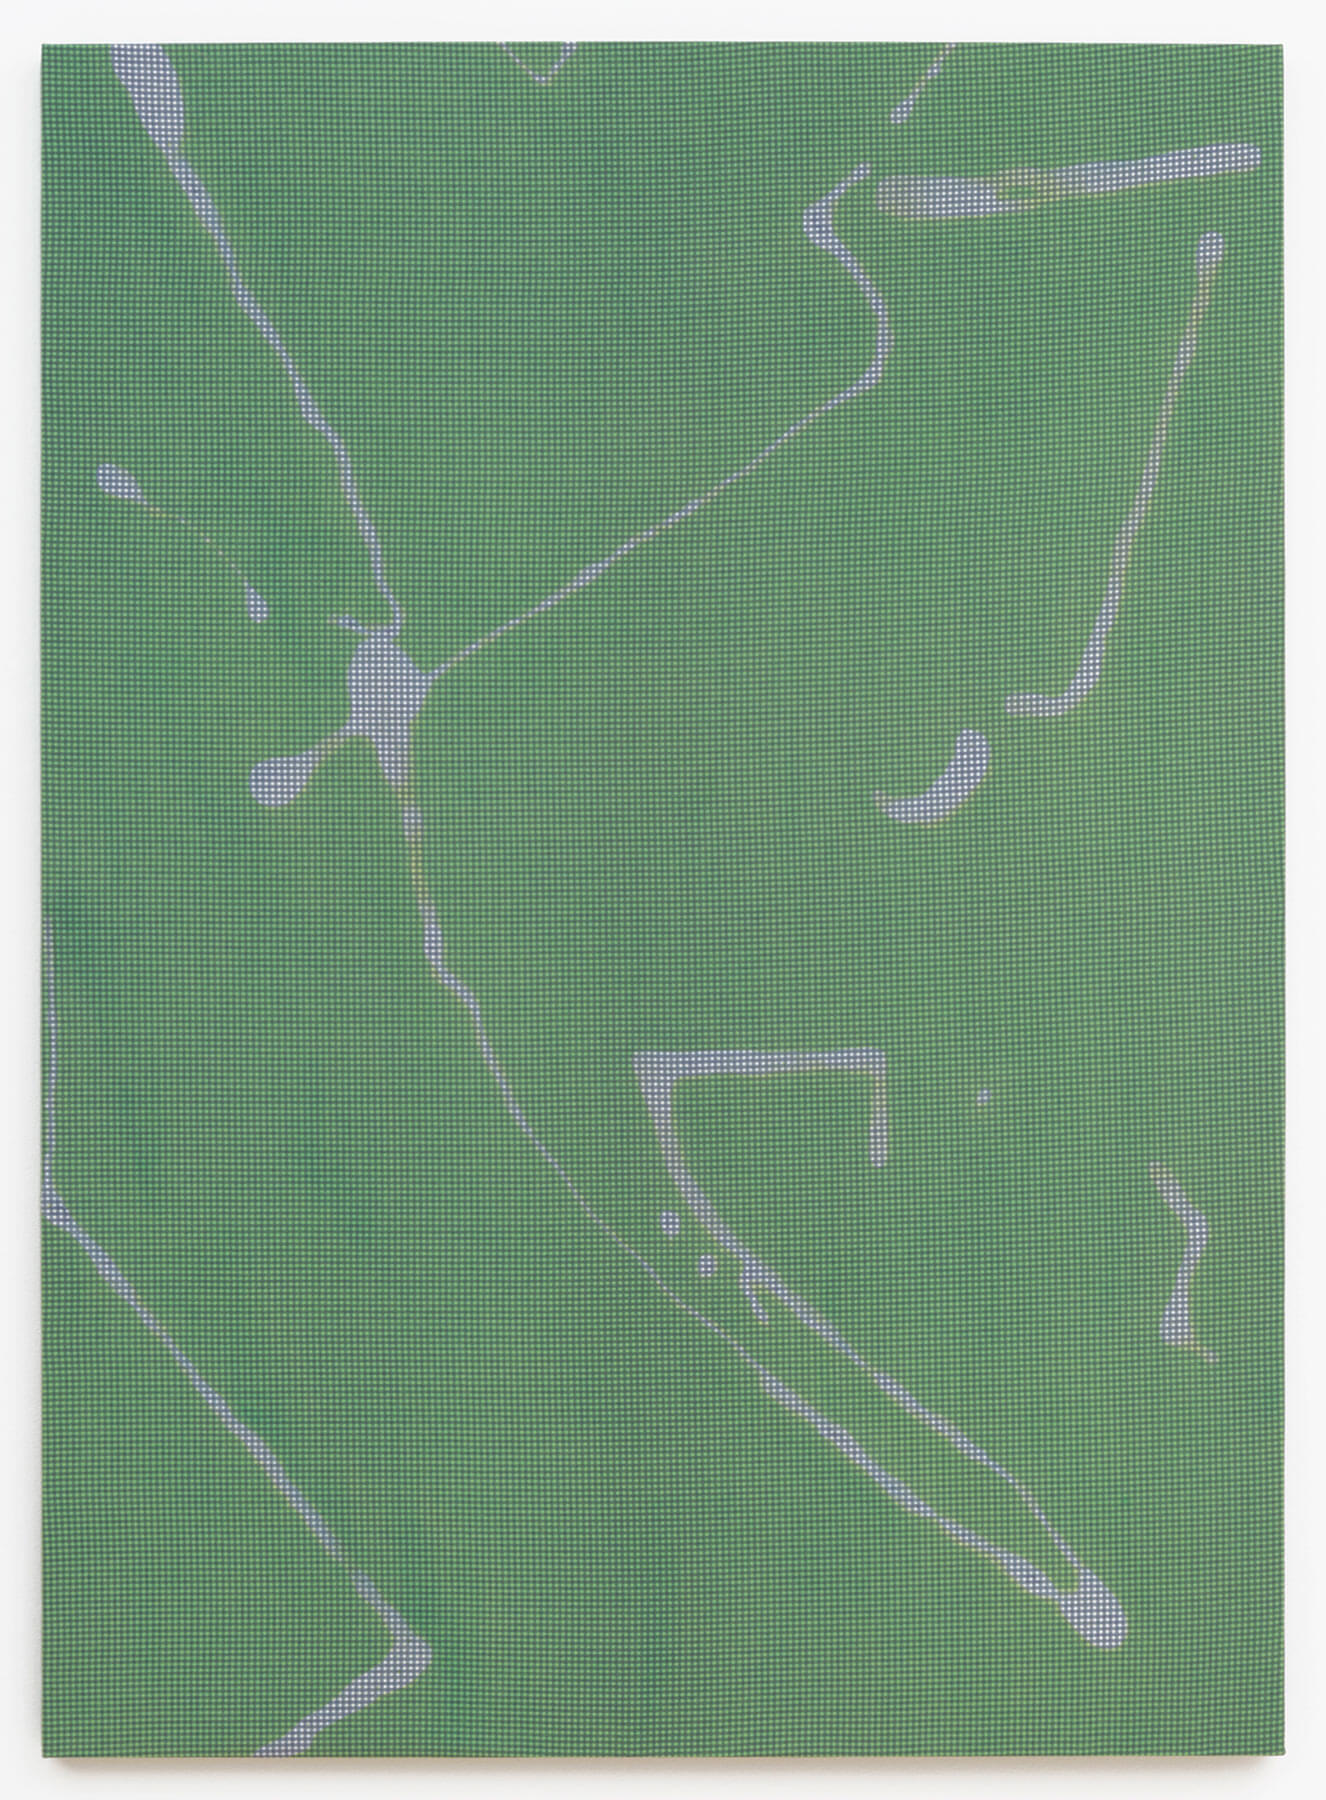 Cheryl Donegan
                                        'Untitled Resist (light green and grey)', 2014
                                        48 x 36 Inches
                                        dyed cotton
                                        